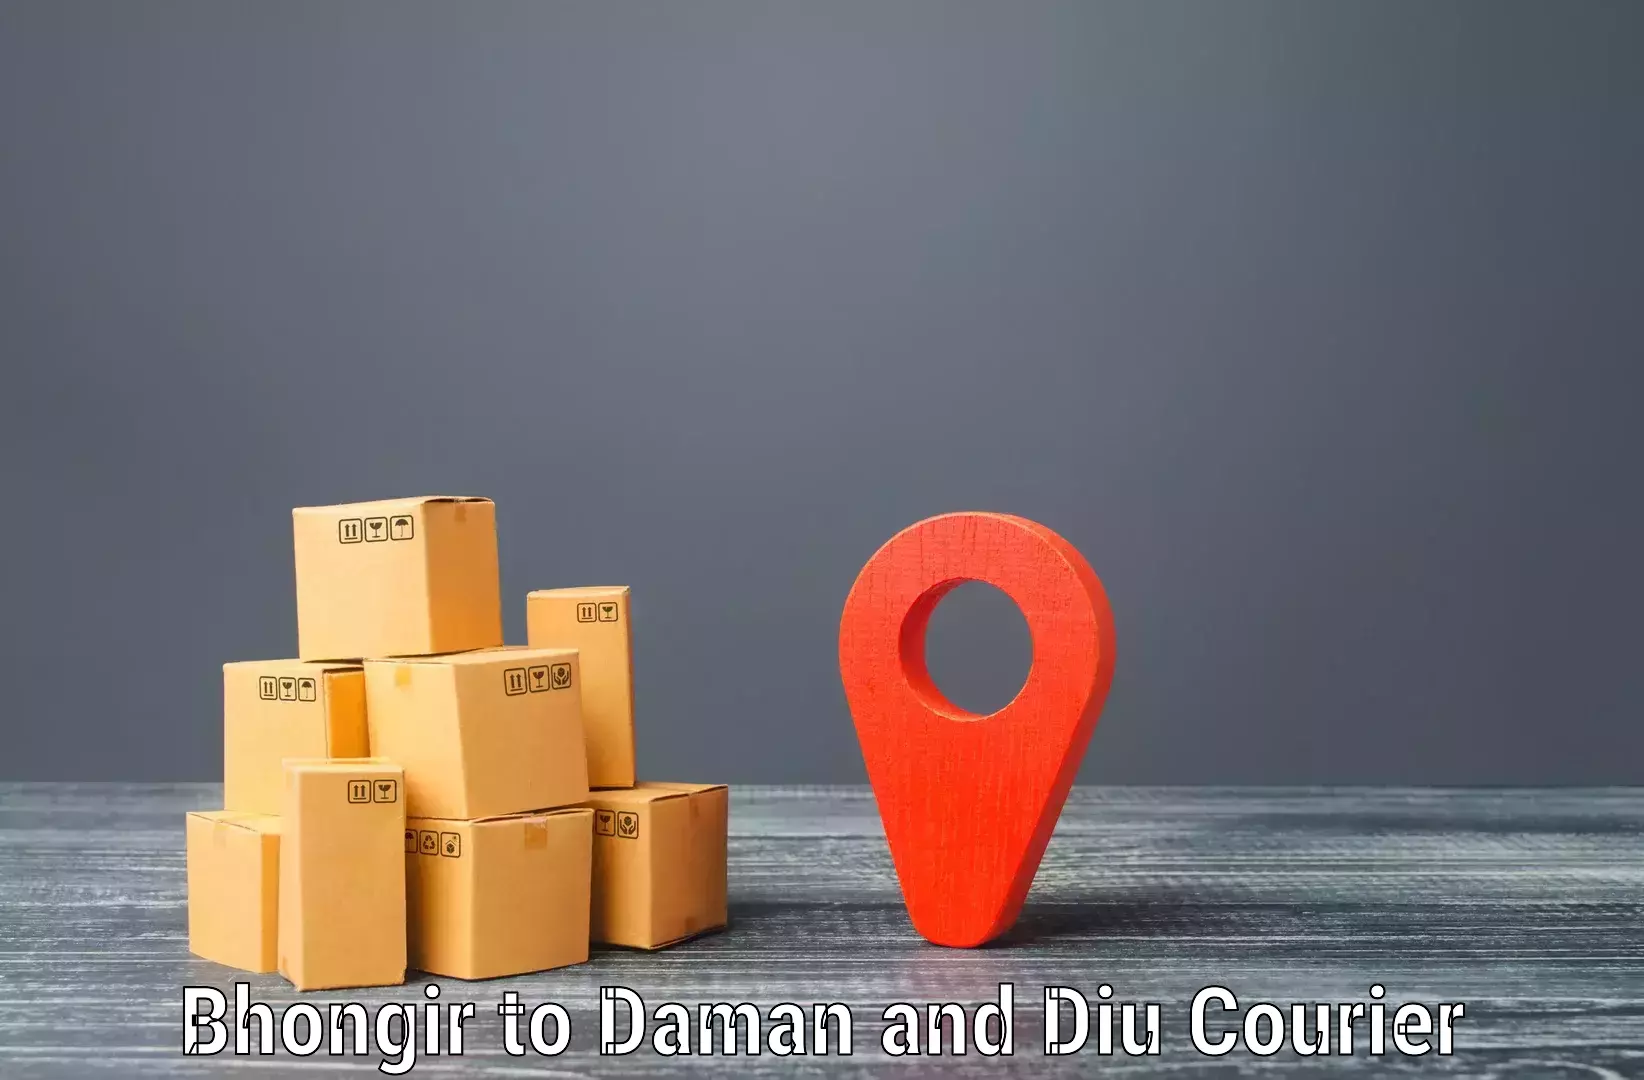 Personalized courier experiences Bhongir to Daman and Diu